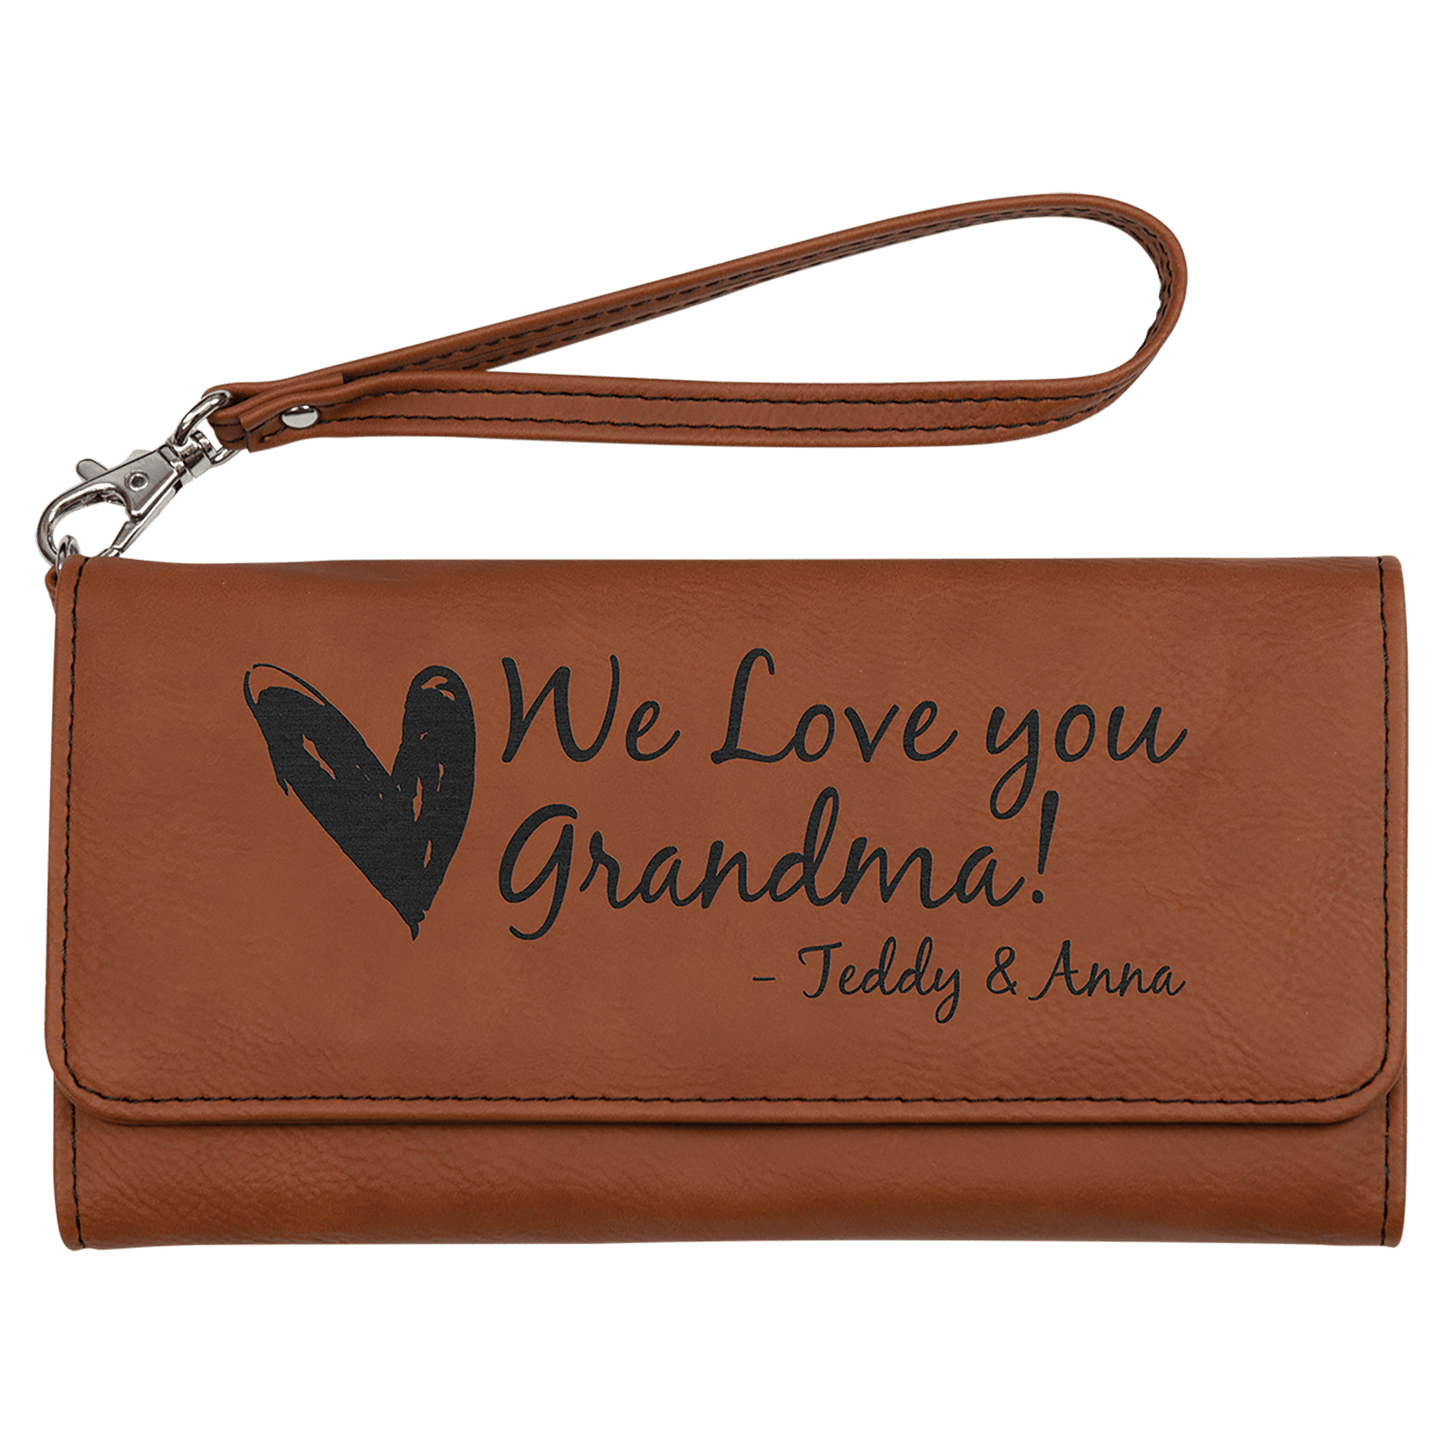 Personalized 7 1/2" x 4" Vegan Leather Wallet with Wrist Strap